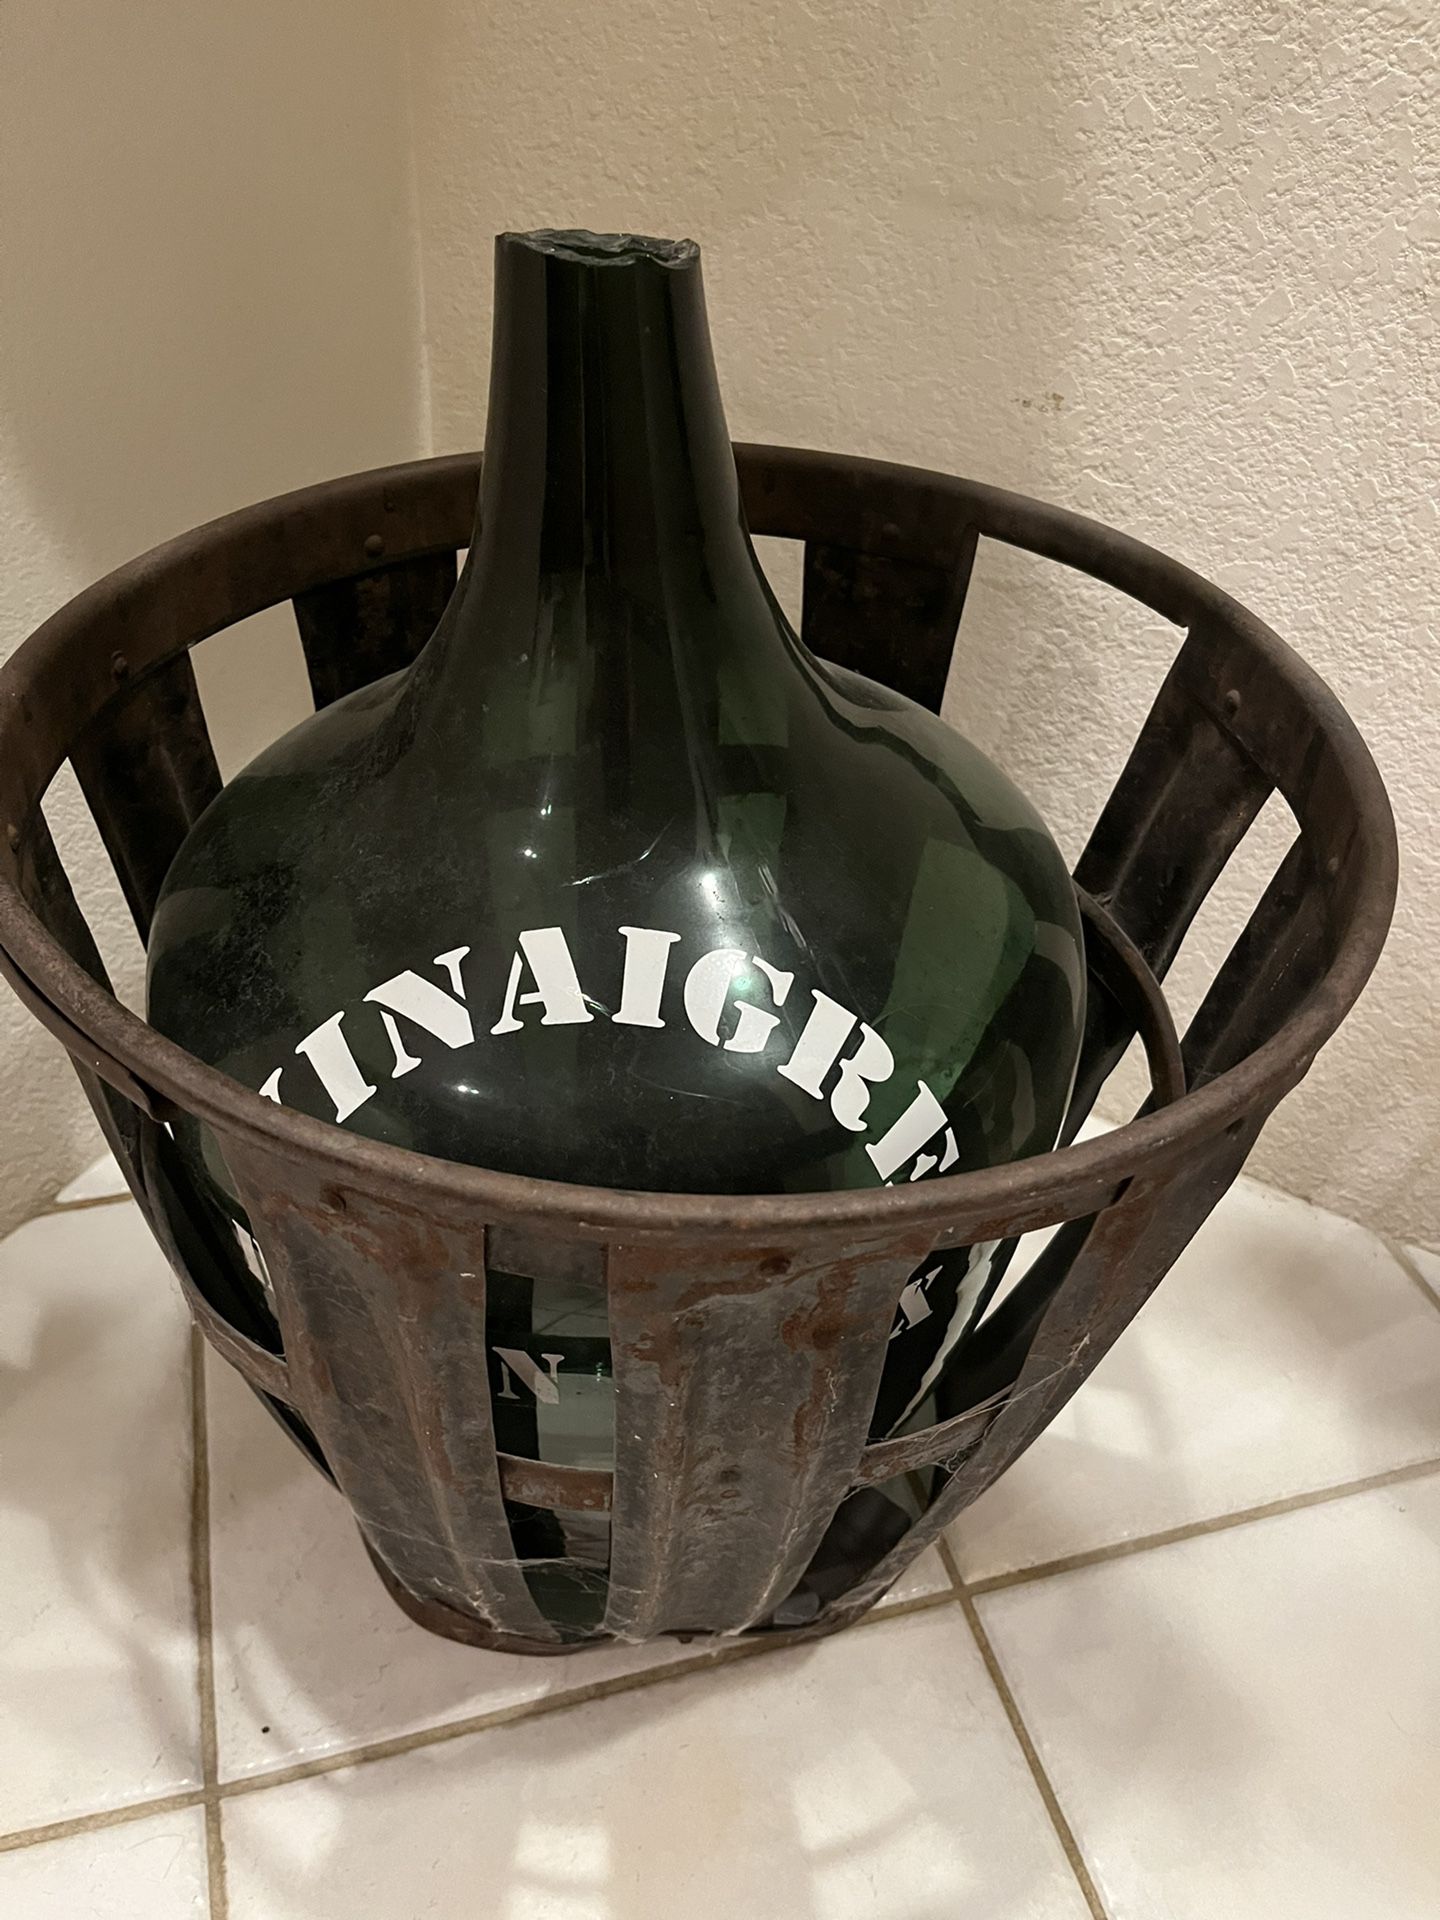 Vintage Wine Bottle In Metal Container